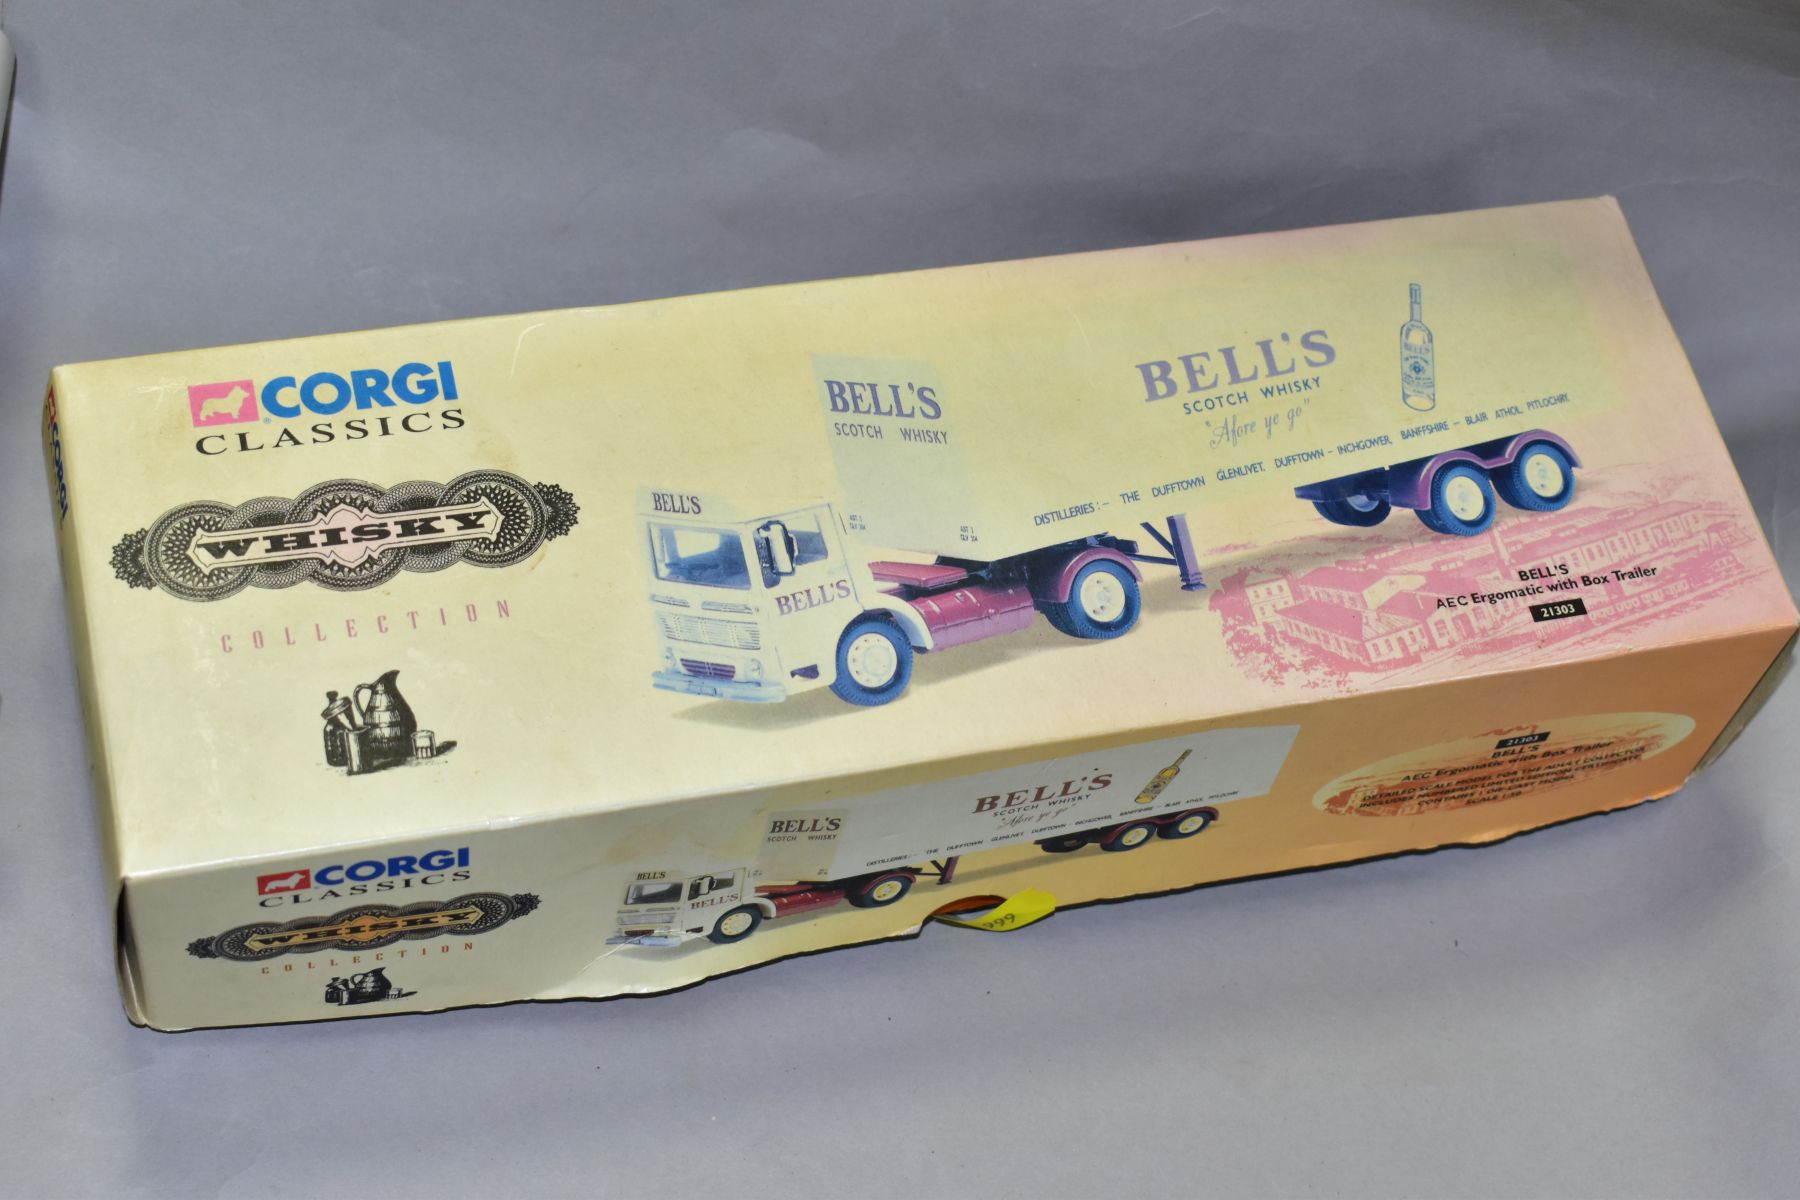 A BOXED CORGI CLASSICS LIMITED EDITION BELLS WHISKY LORRY, together with an Original Odhner adding - Image 2 of 5